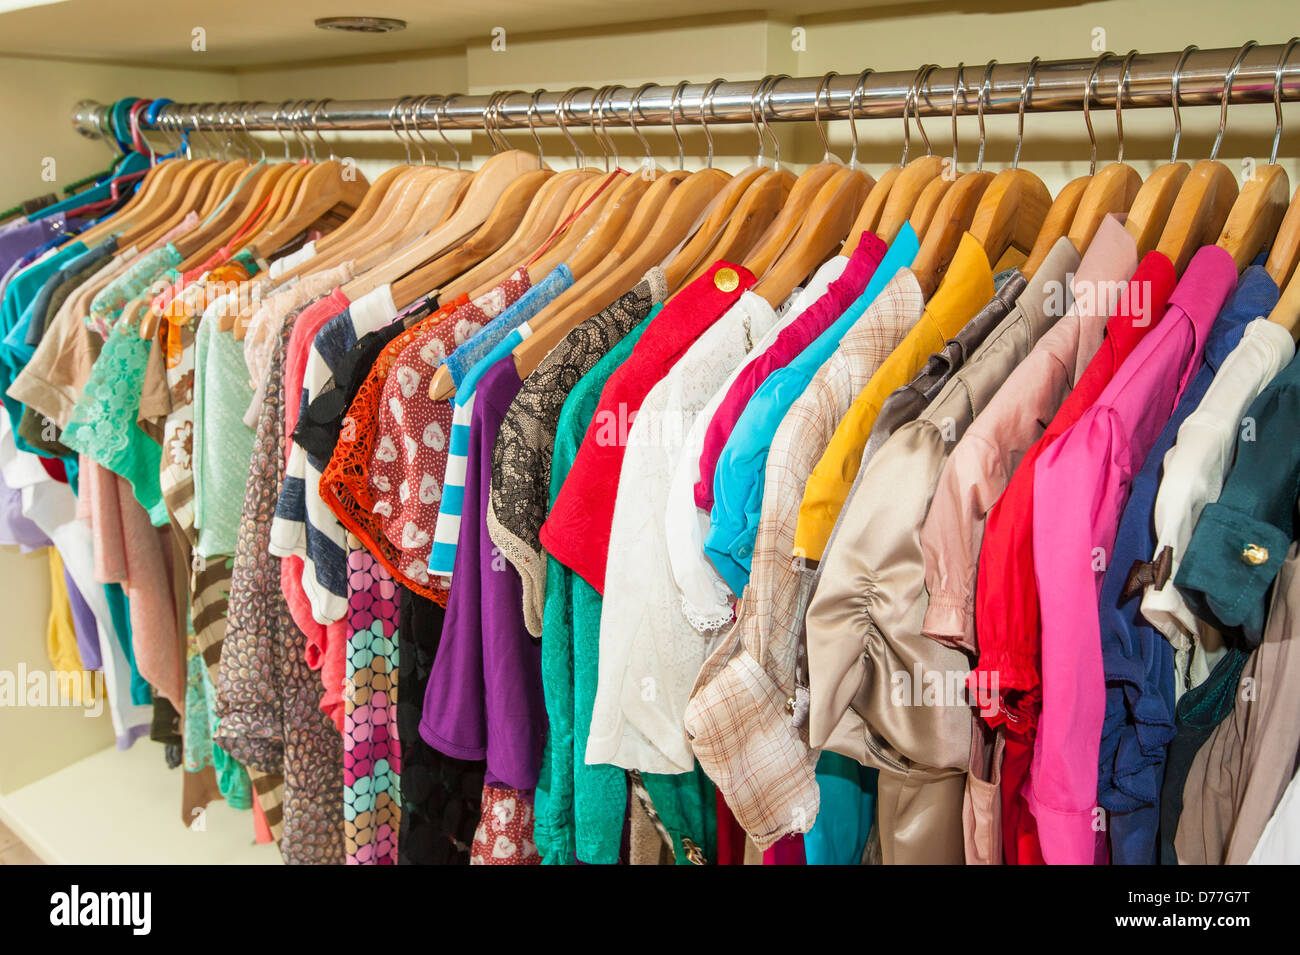 https://c8.alamy.com/comp/D77G7T/various-multi-colored-items-of-clothing-hanging-on-hangers-and-rail-D77G7T.jpg